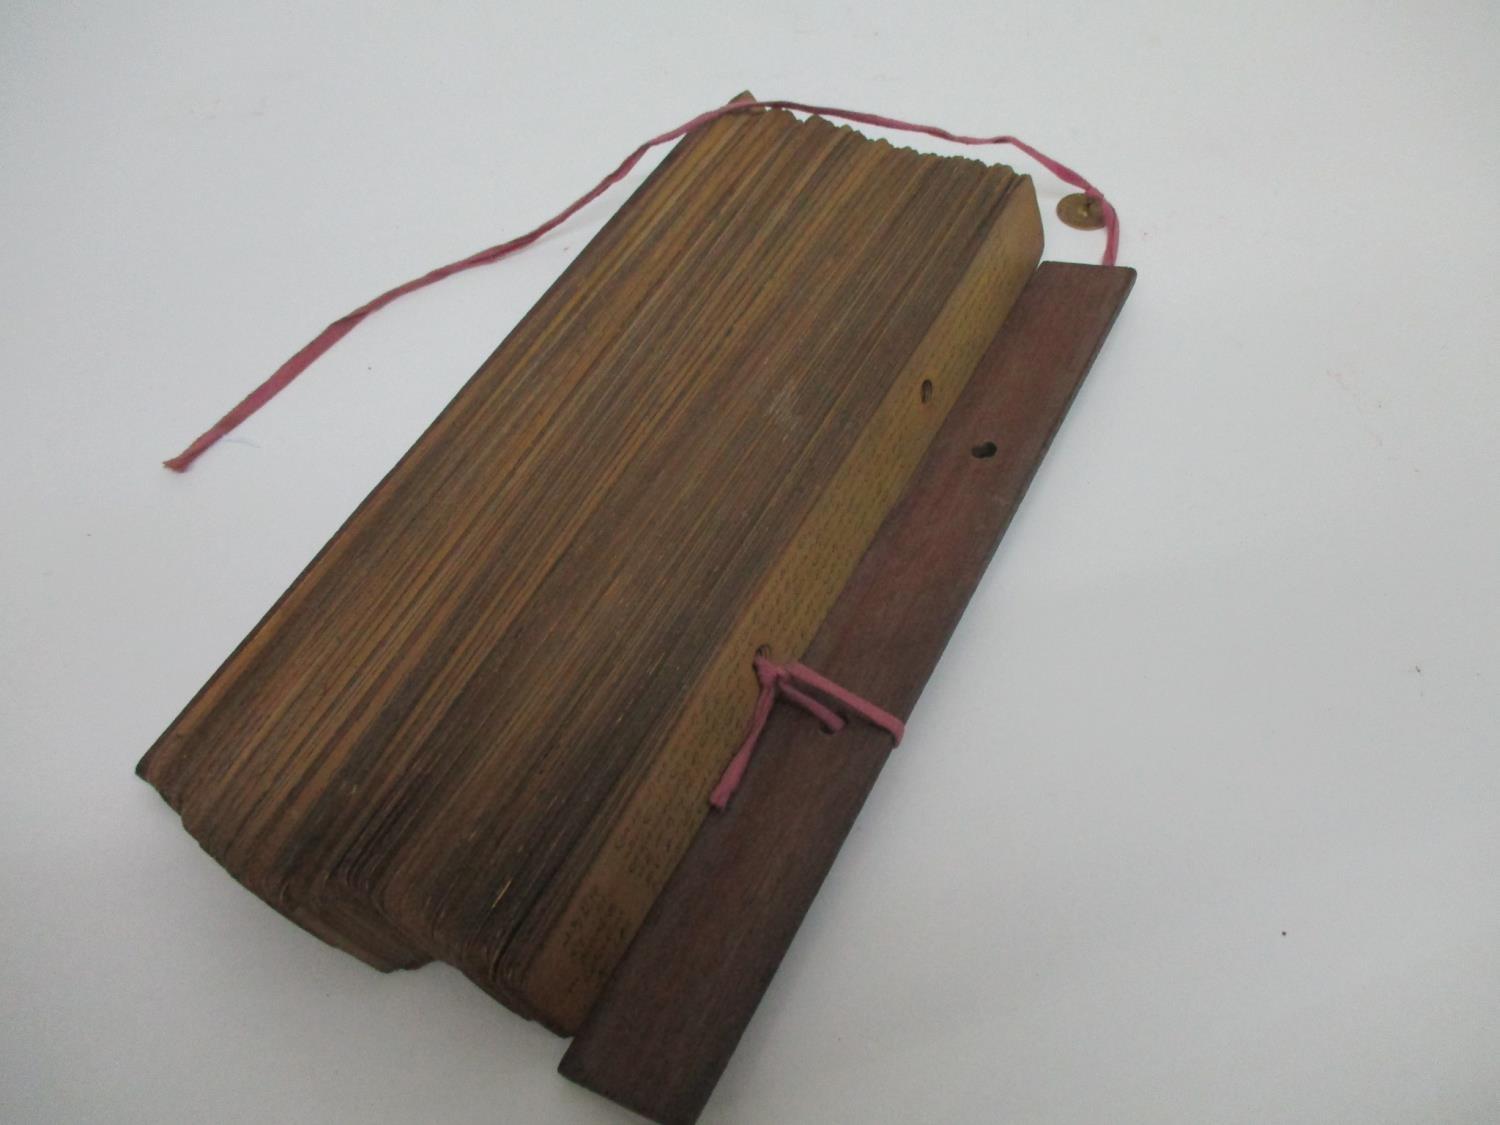 A 19th century South East Asian Buddhist manuscript on palm leaves, with wooden covers, 11 1/2" l - Image 2 of 4